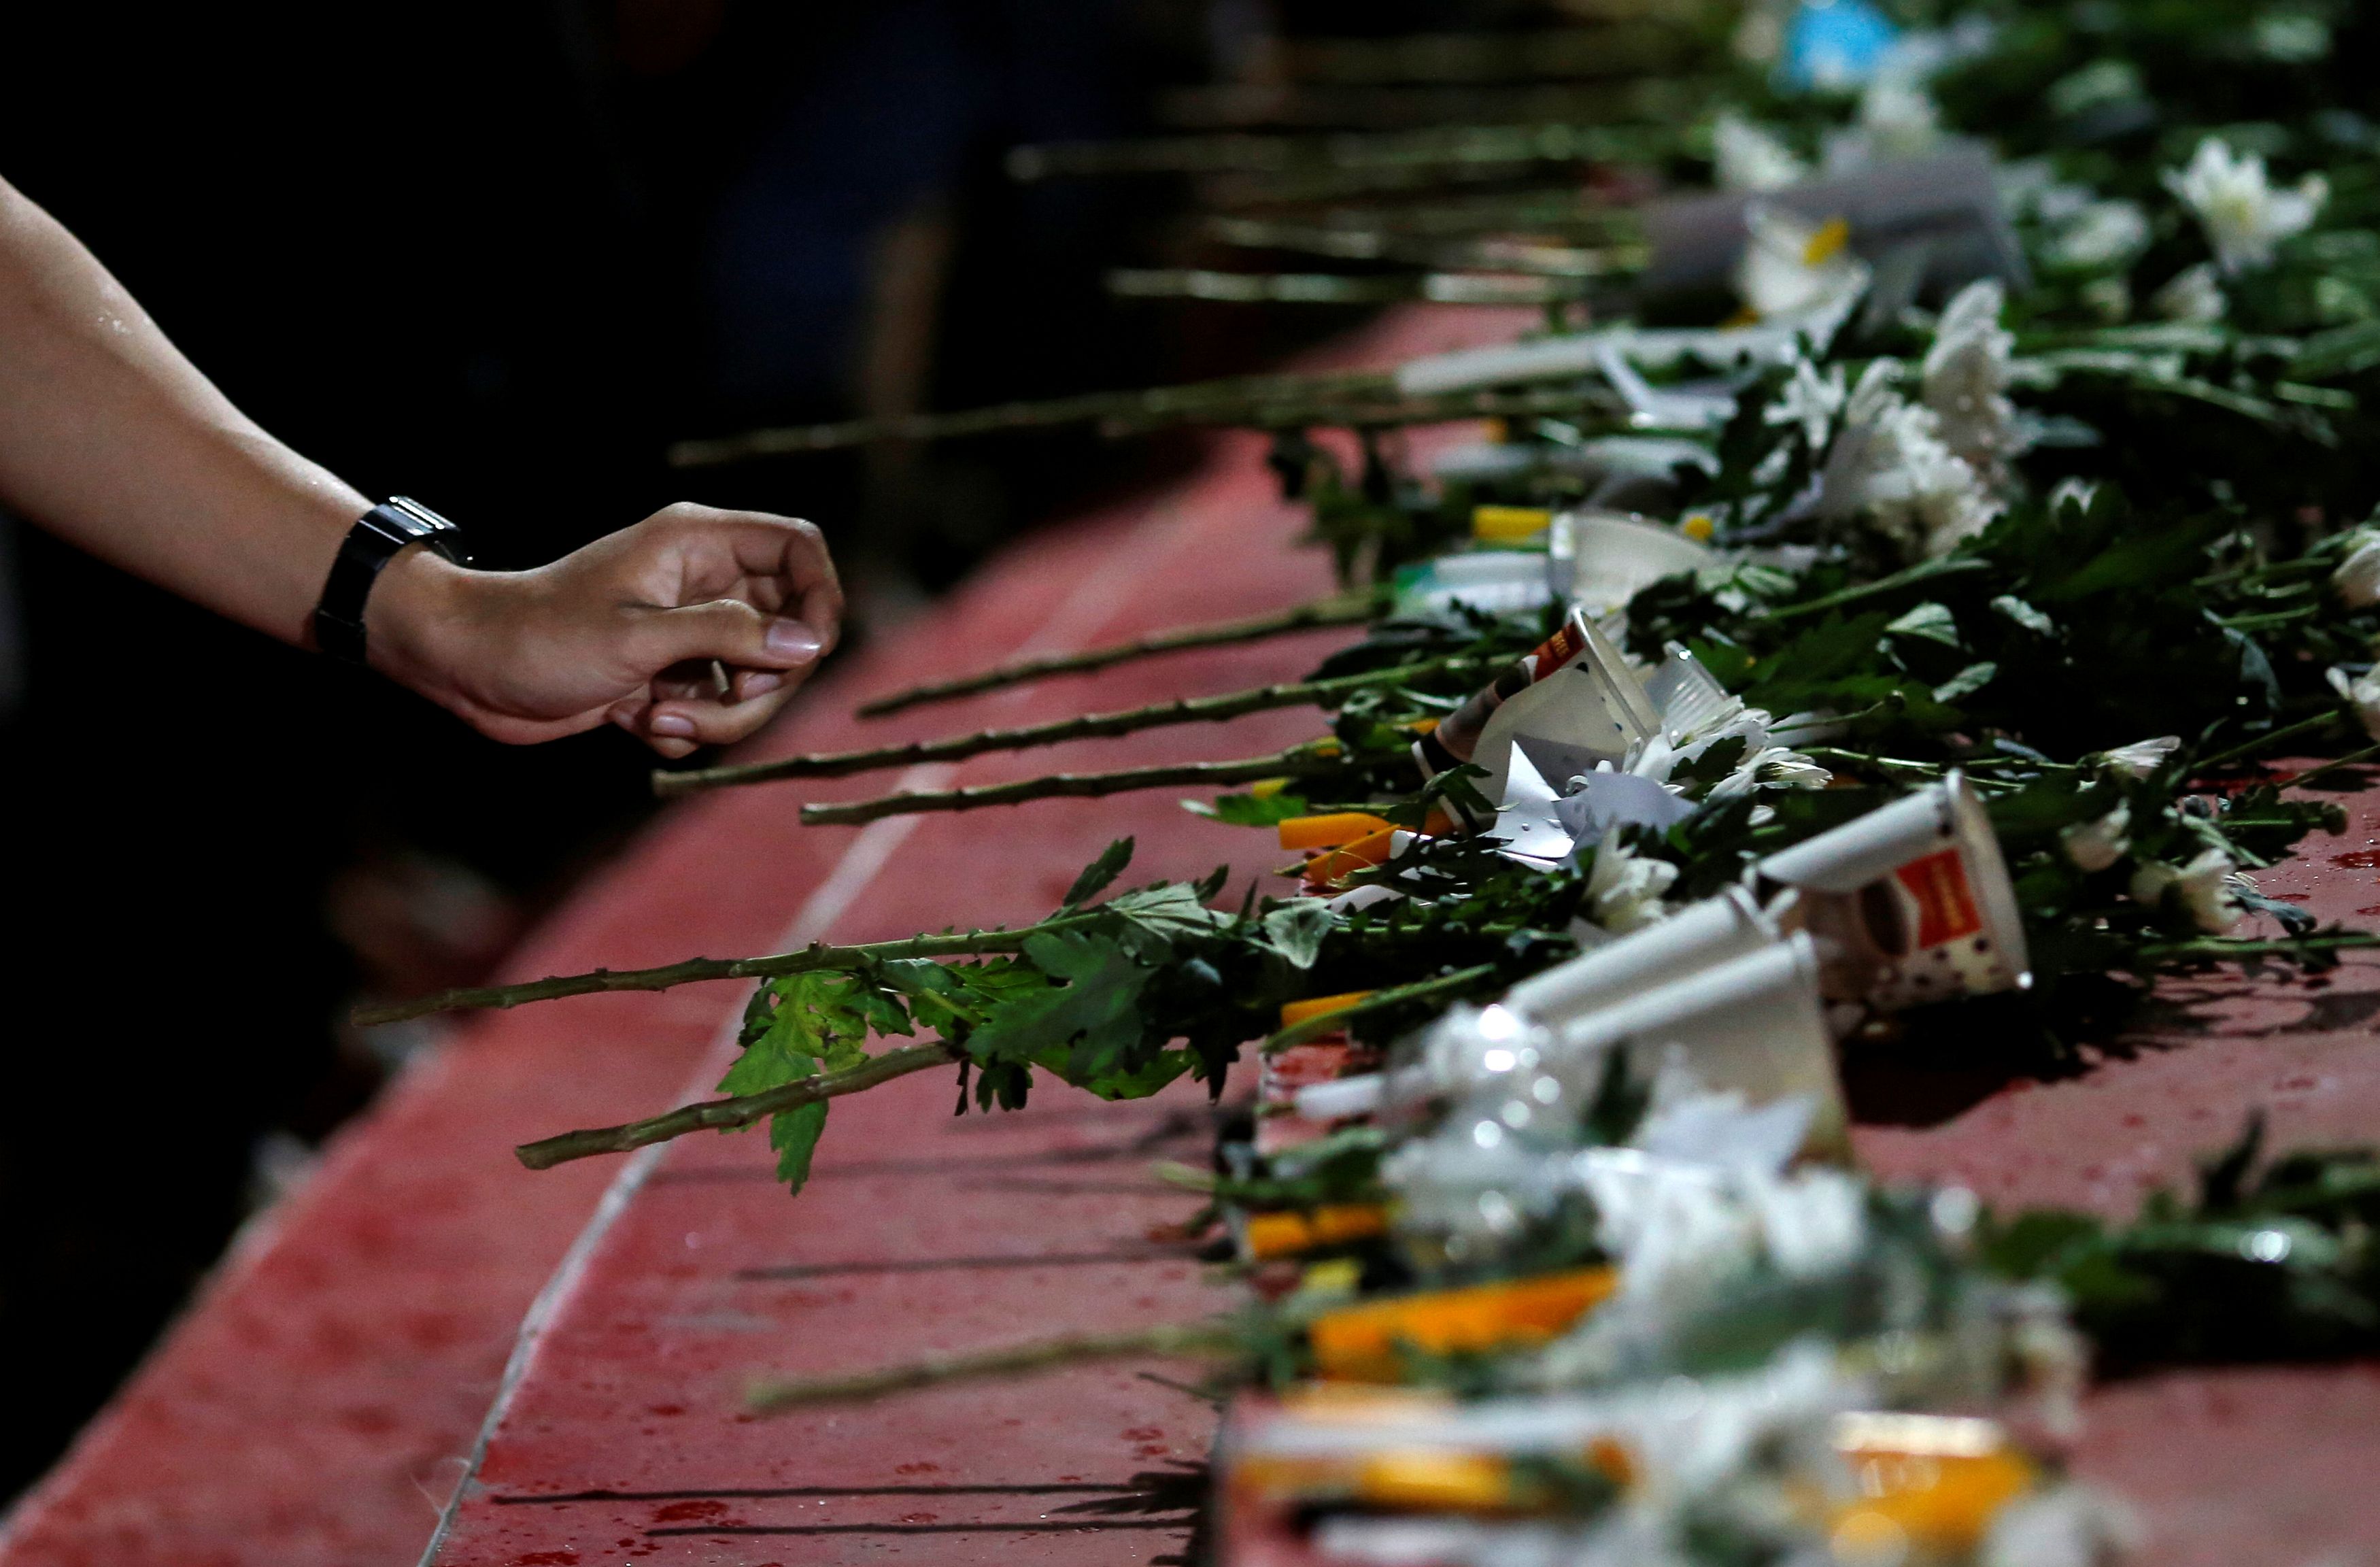 Local people place flowers as they pray for victims who died in mass shooting, involving a Thai soldier on a shooting rampage, in Nakhon Ratchasima